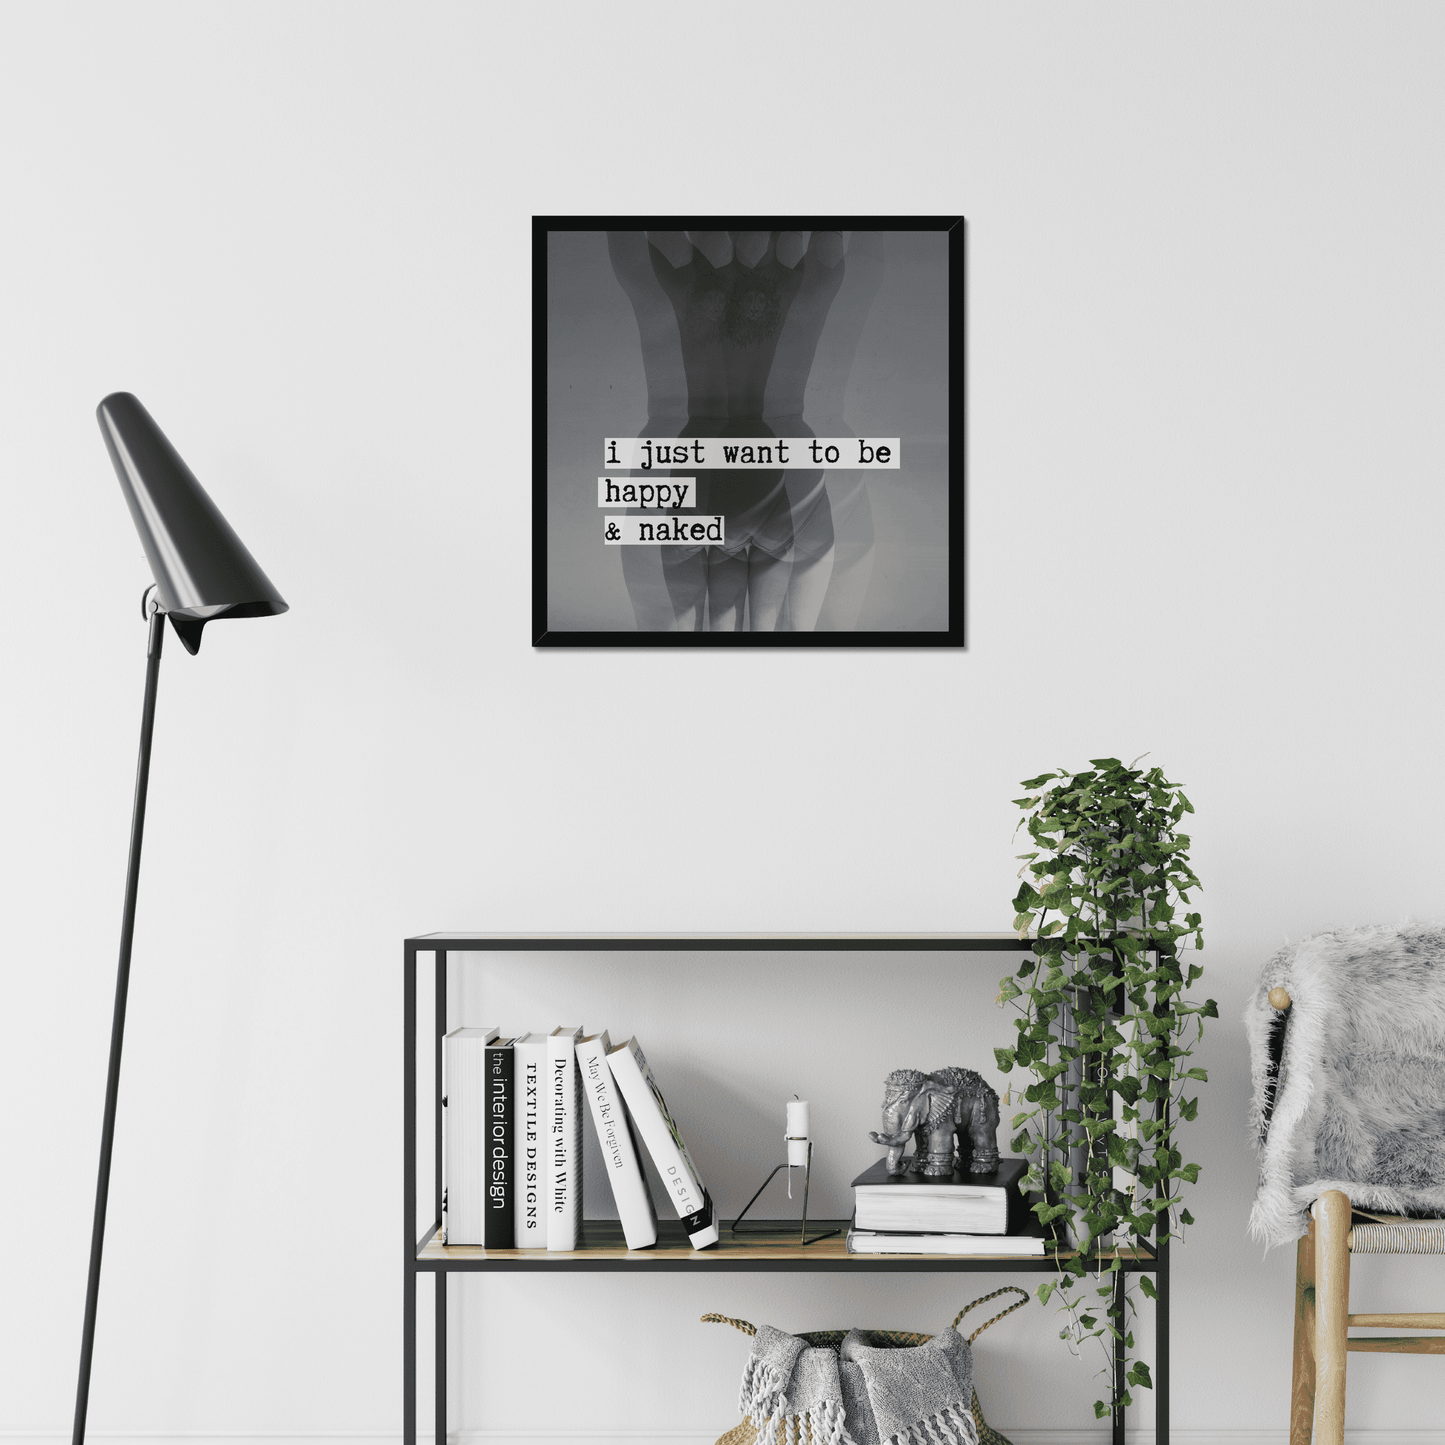 I just want to be happy and naked!  A creative black and white photography print, with a typewriter style typography overlay - making a clear statement for body positivity and acceptance.